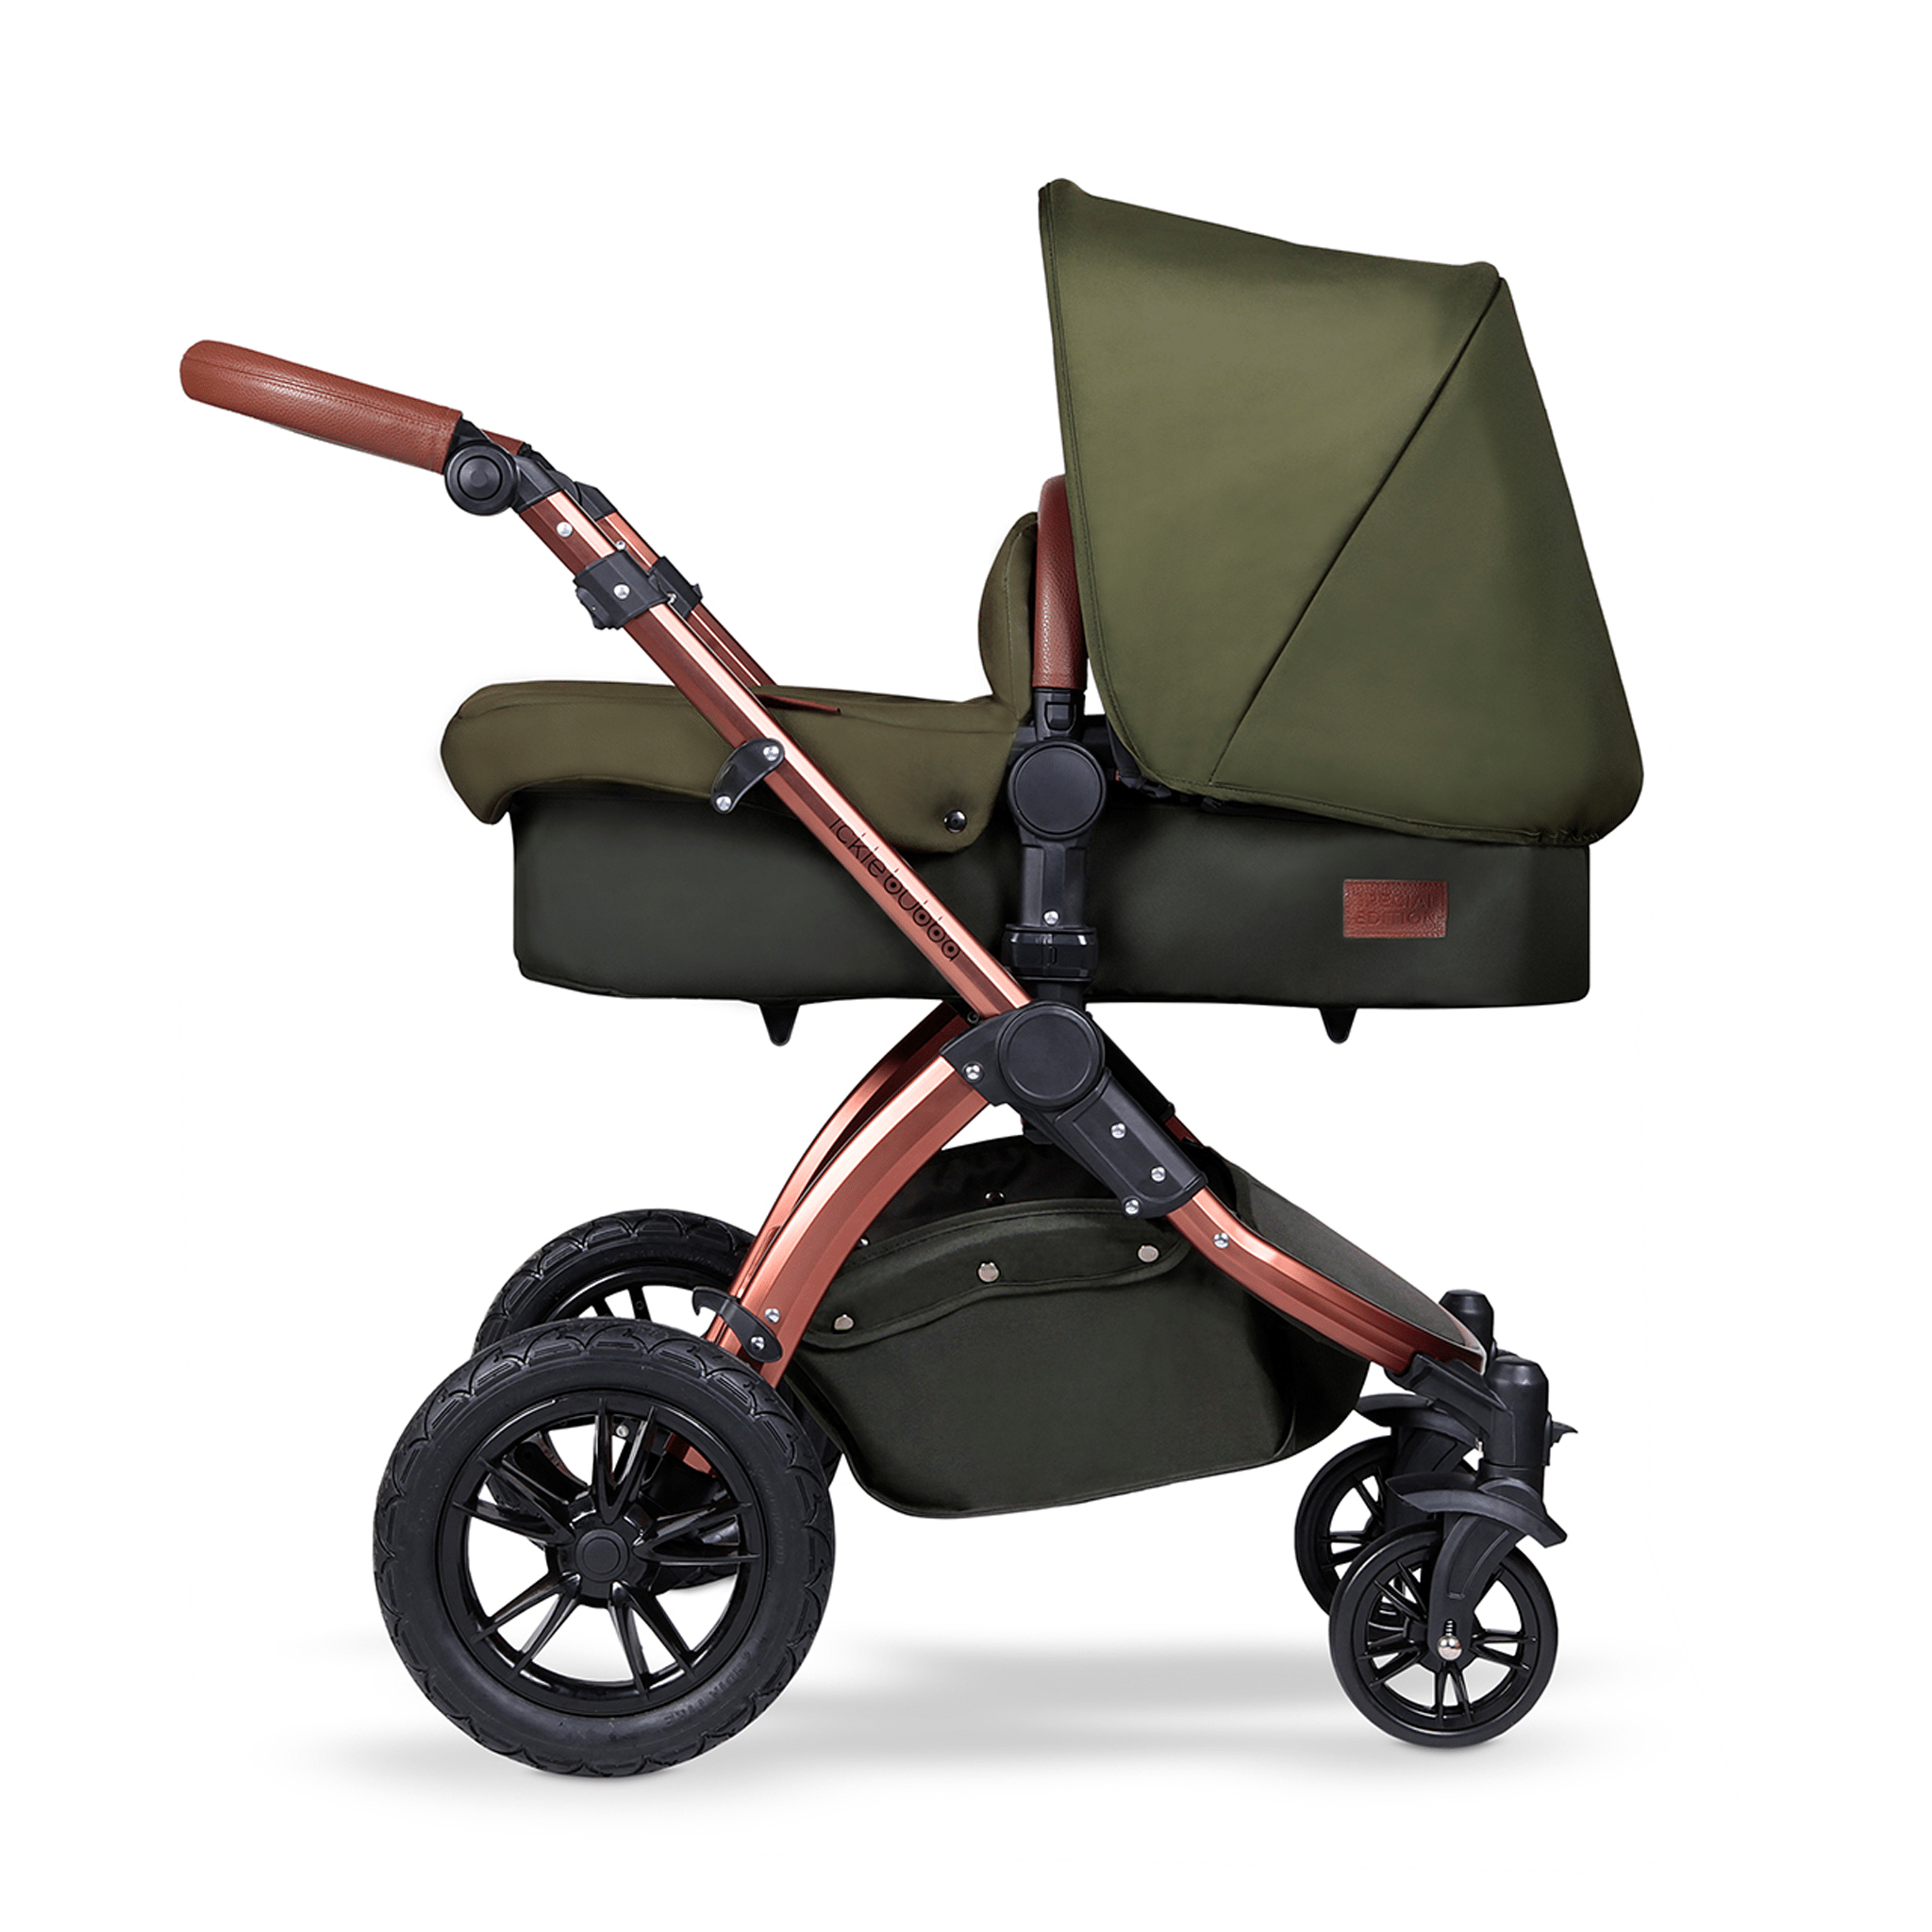 Ickle Bubba baby pushchairs Ickle Bubba Stomp V4 2-in-1 Pushchair Bronze/Woodland 10-004-000-022